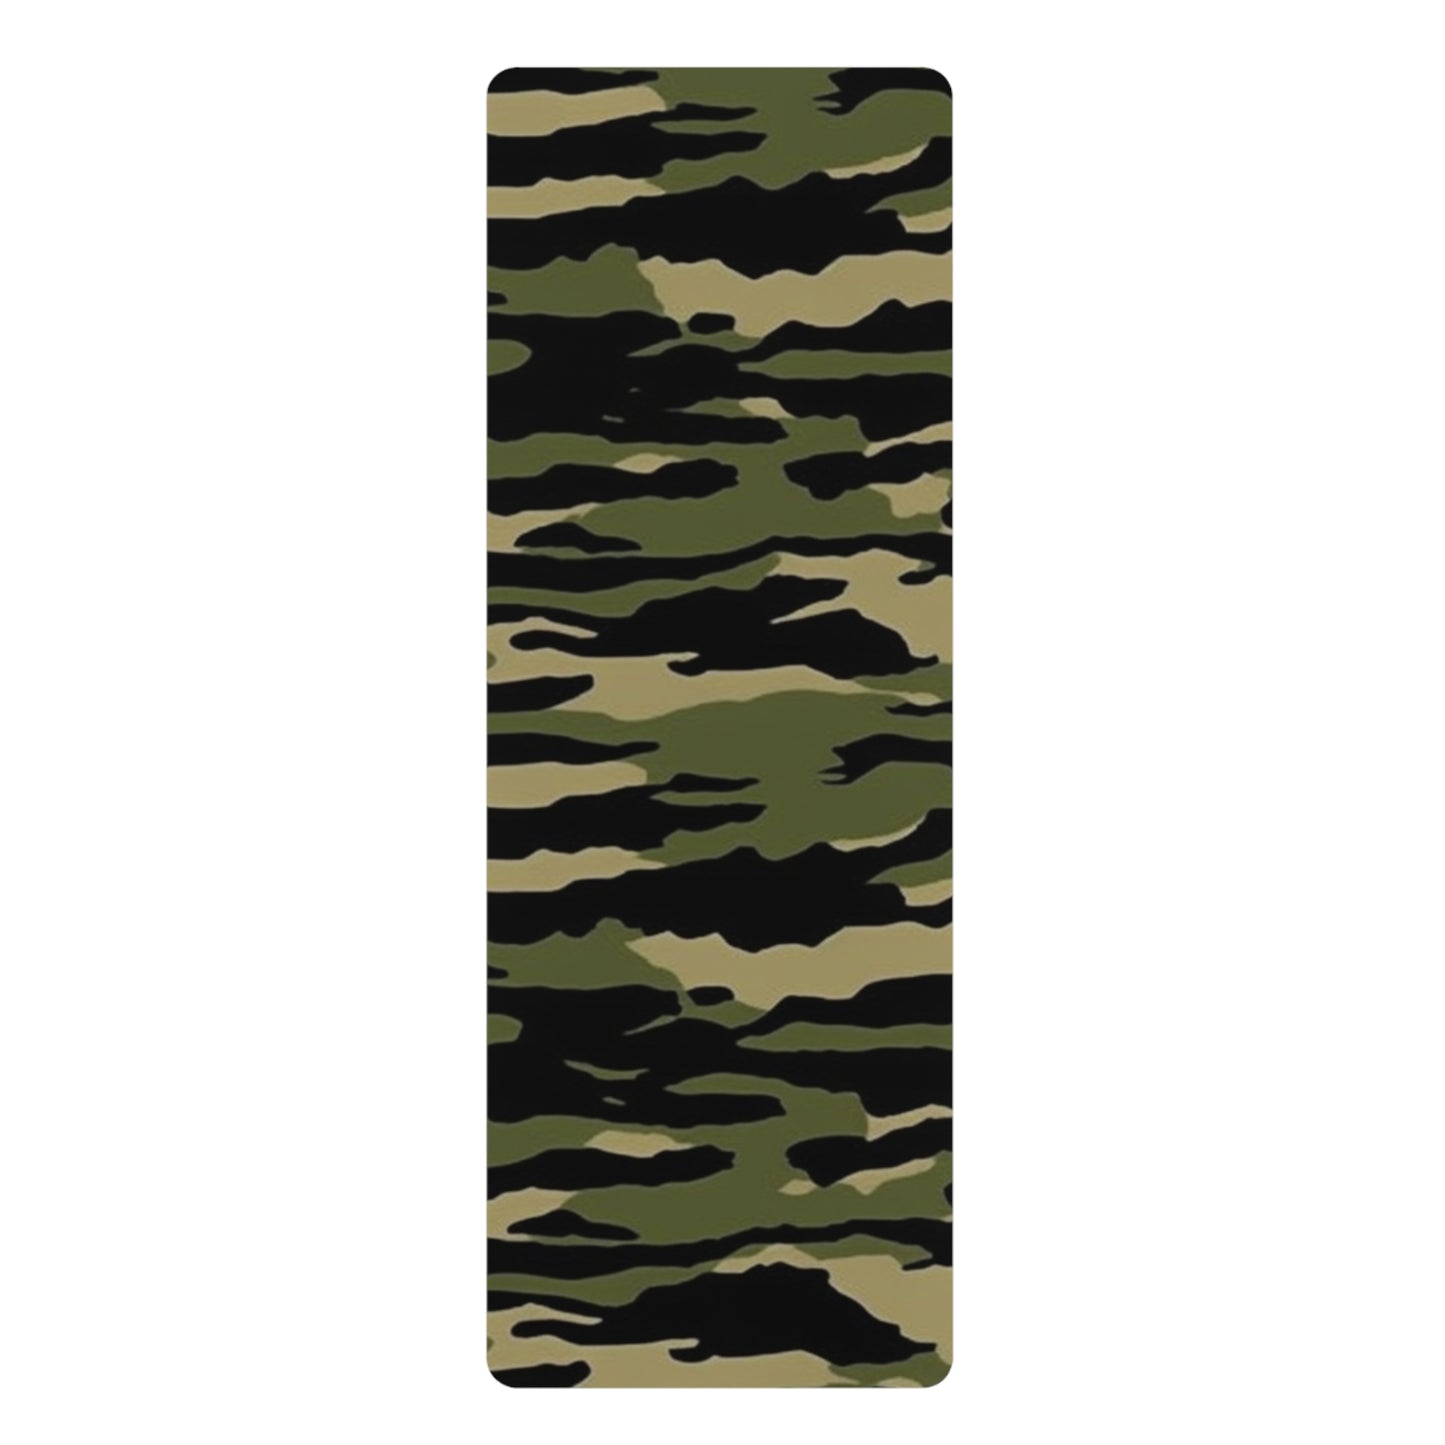 Tiger Stripe Camouflage: Military Style - Rubber Yoga Mat